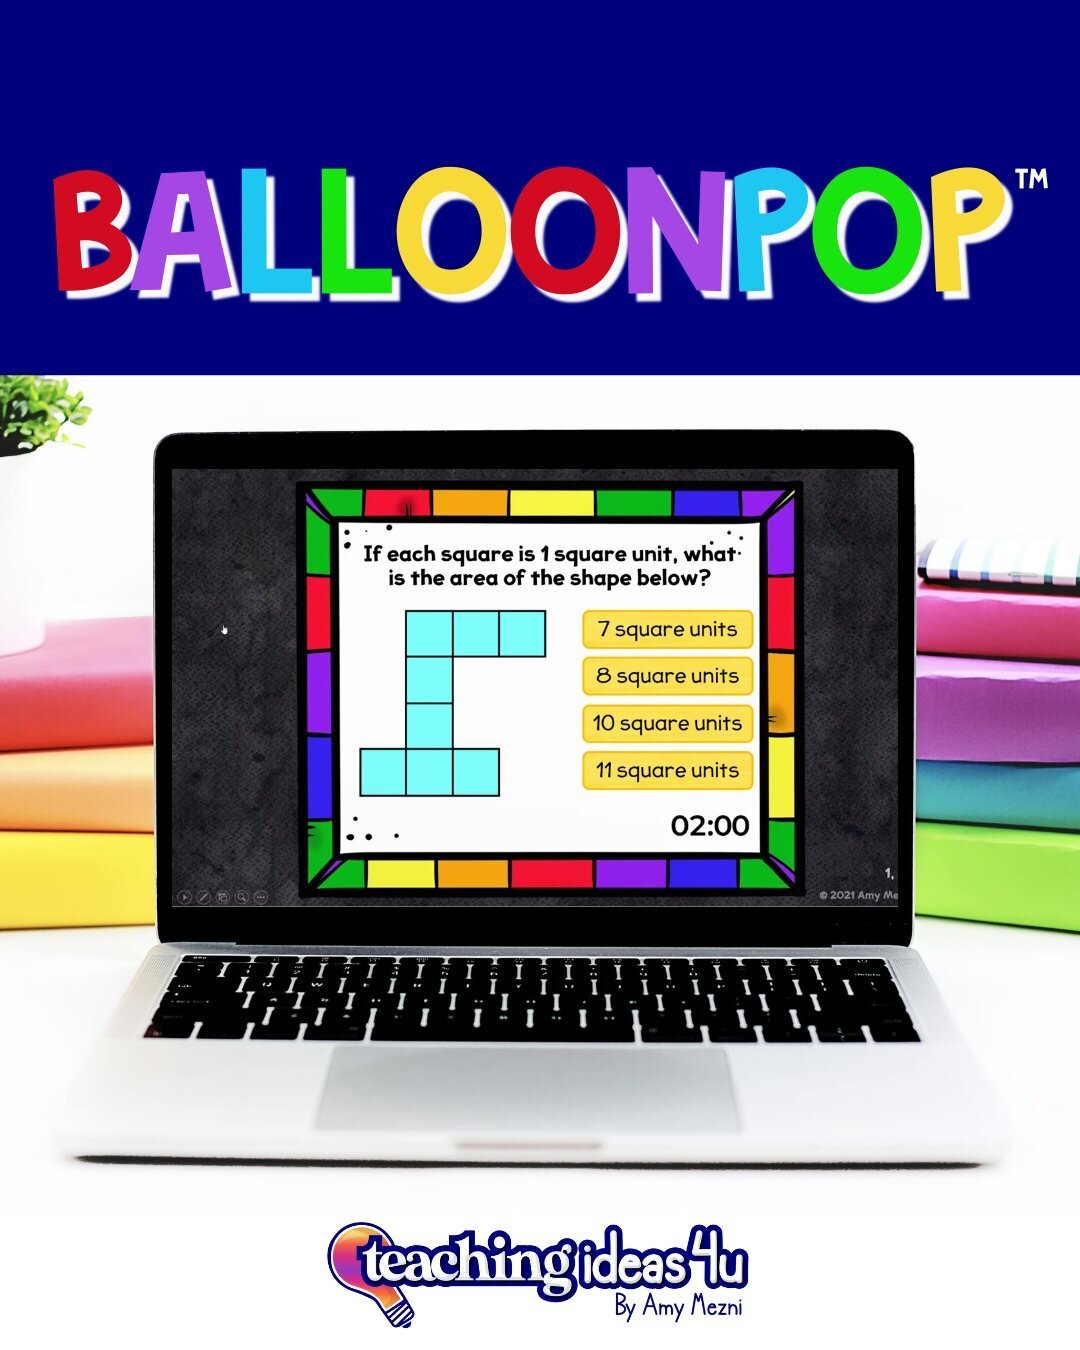 5/5 stars for BalloonPop&trade;!

⭐️⭐️⭐️⭐️⭐️ &quot;My students and I LOVE these balloon popping games! The suspense and cheer when a balloon is popped to reveal the value is so much fun! The graphics and noises are such fun details that the students 